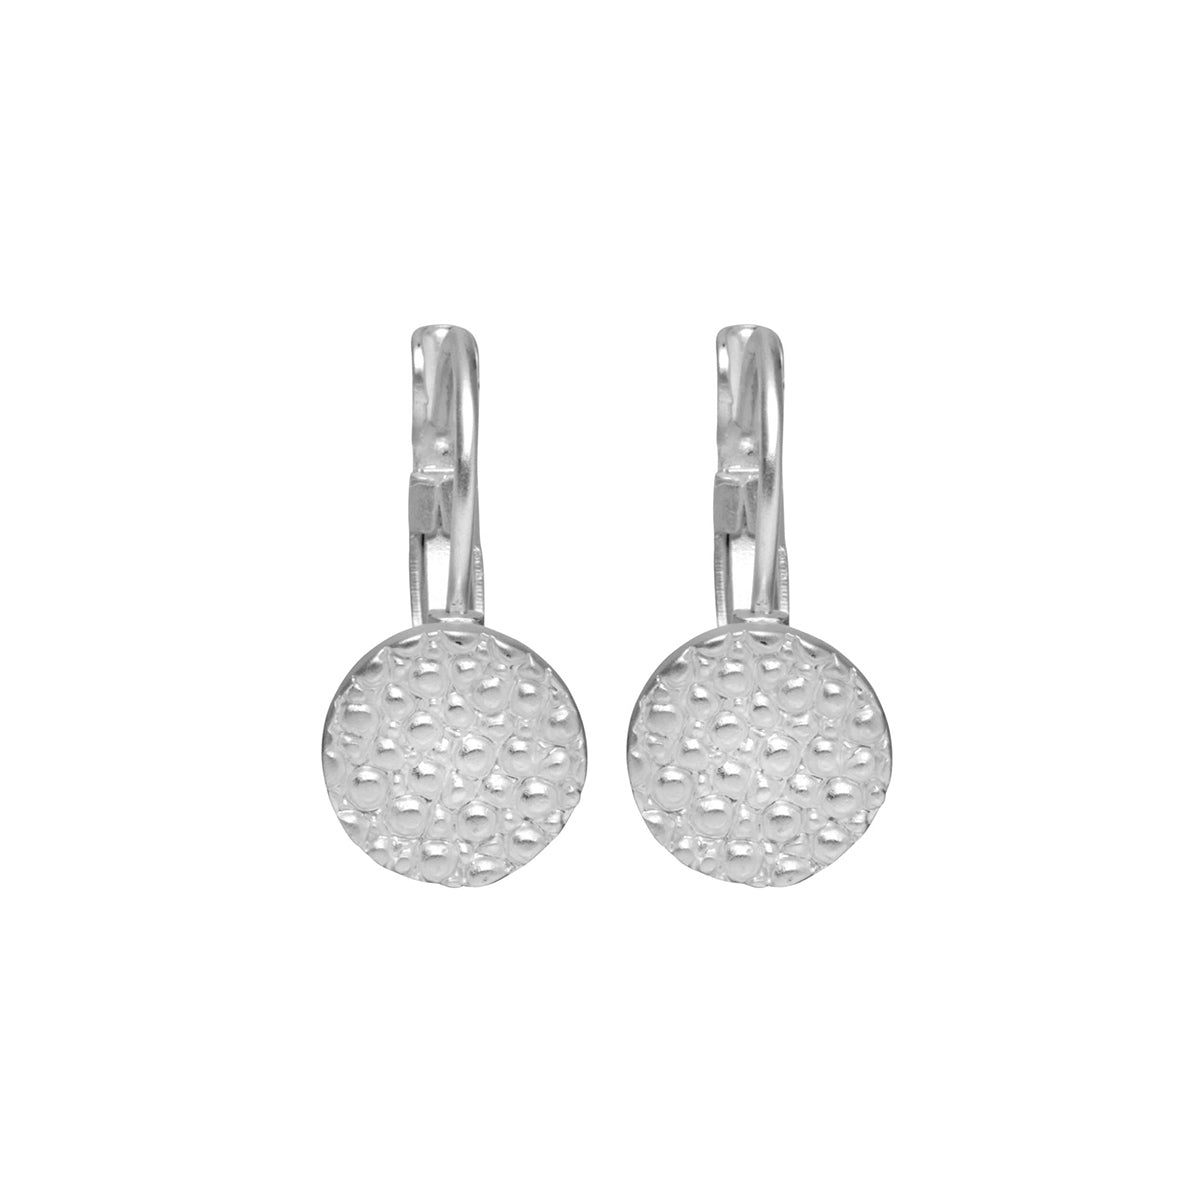 Dansk- Trixie silver colour ion plated earrings with surgical steel posts